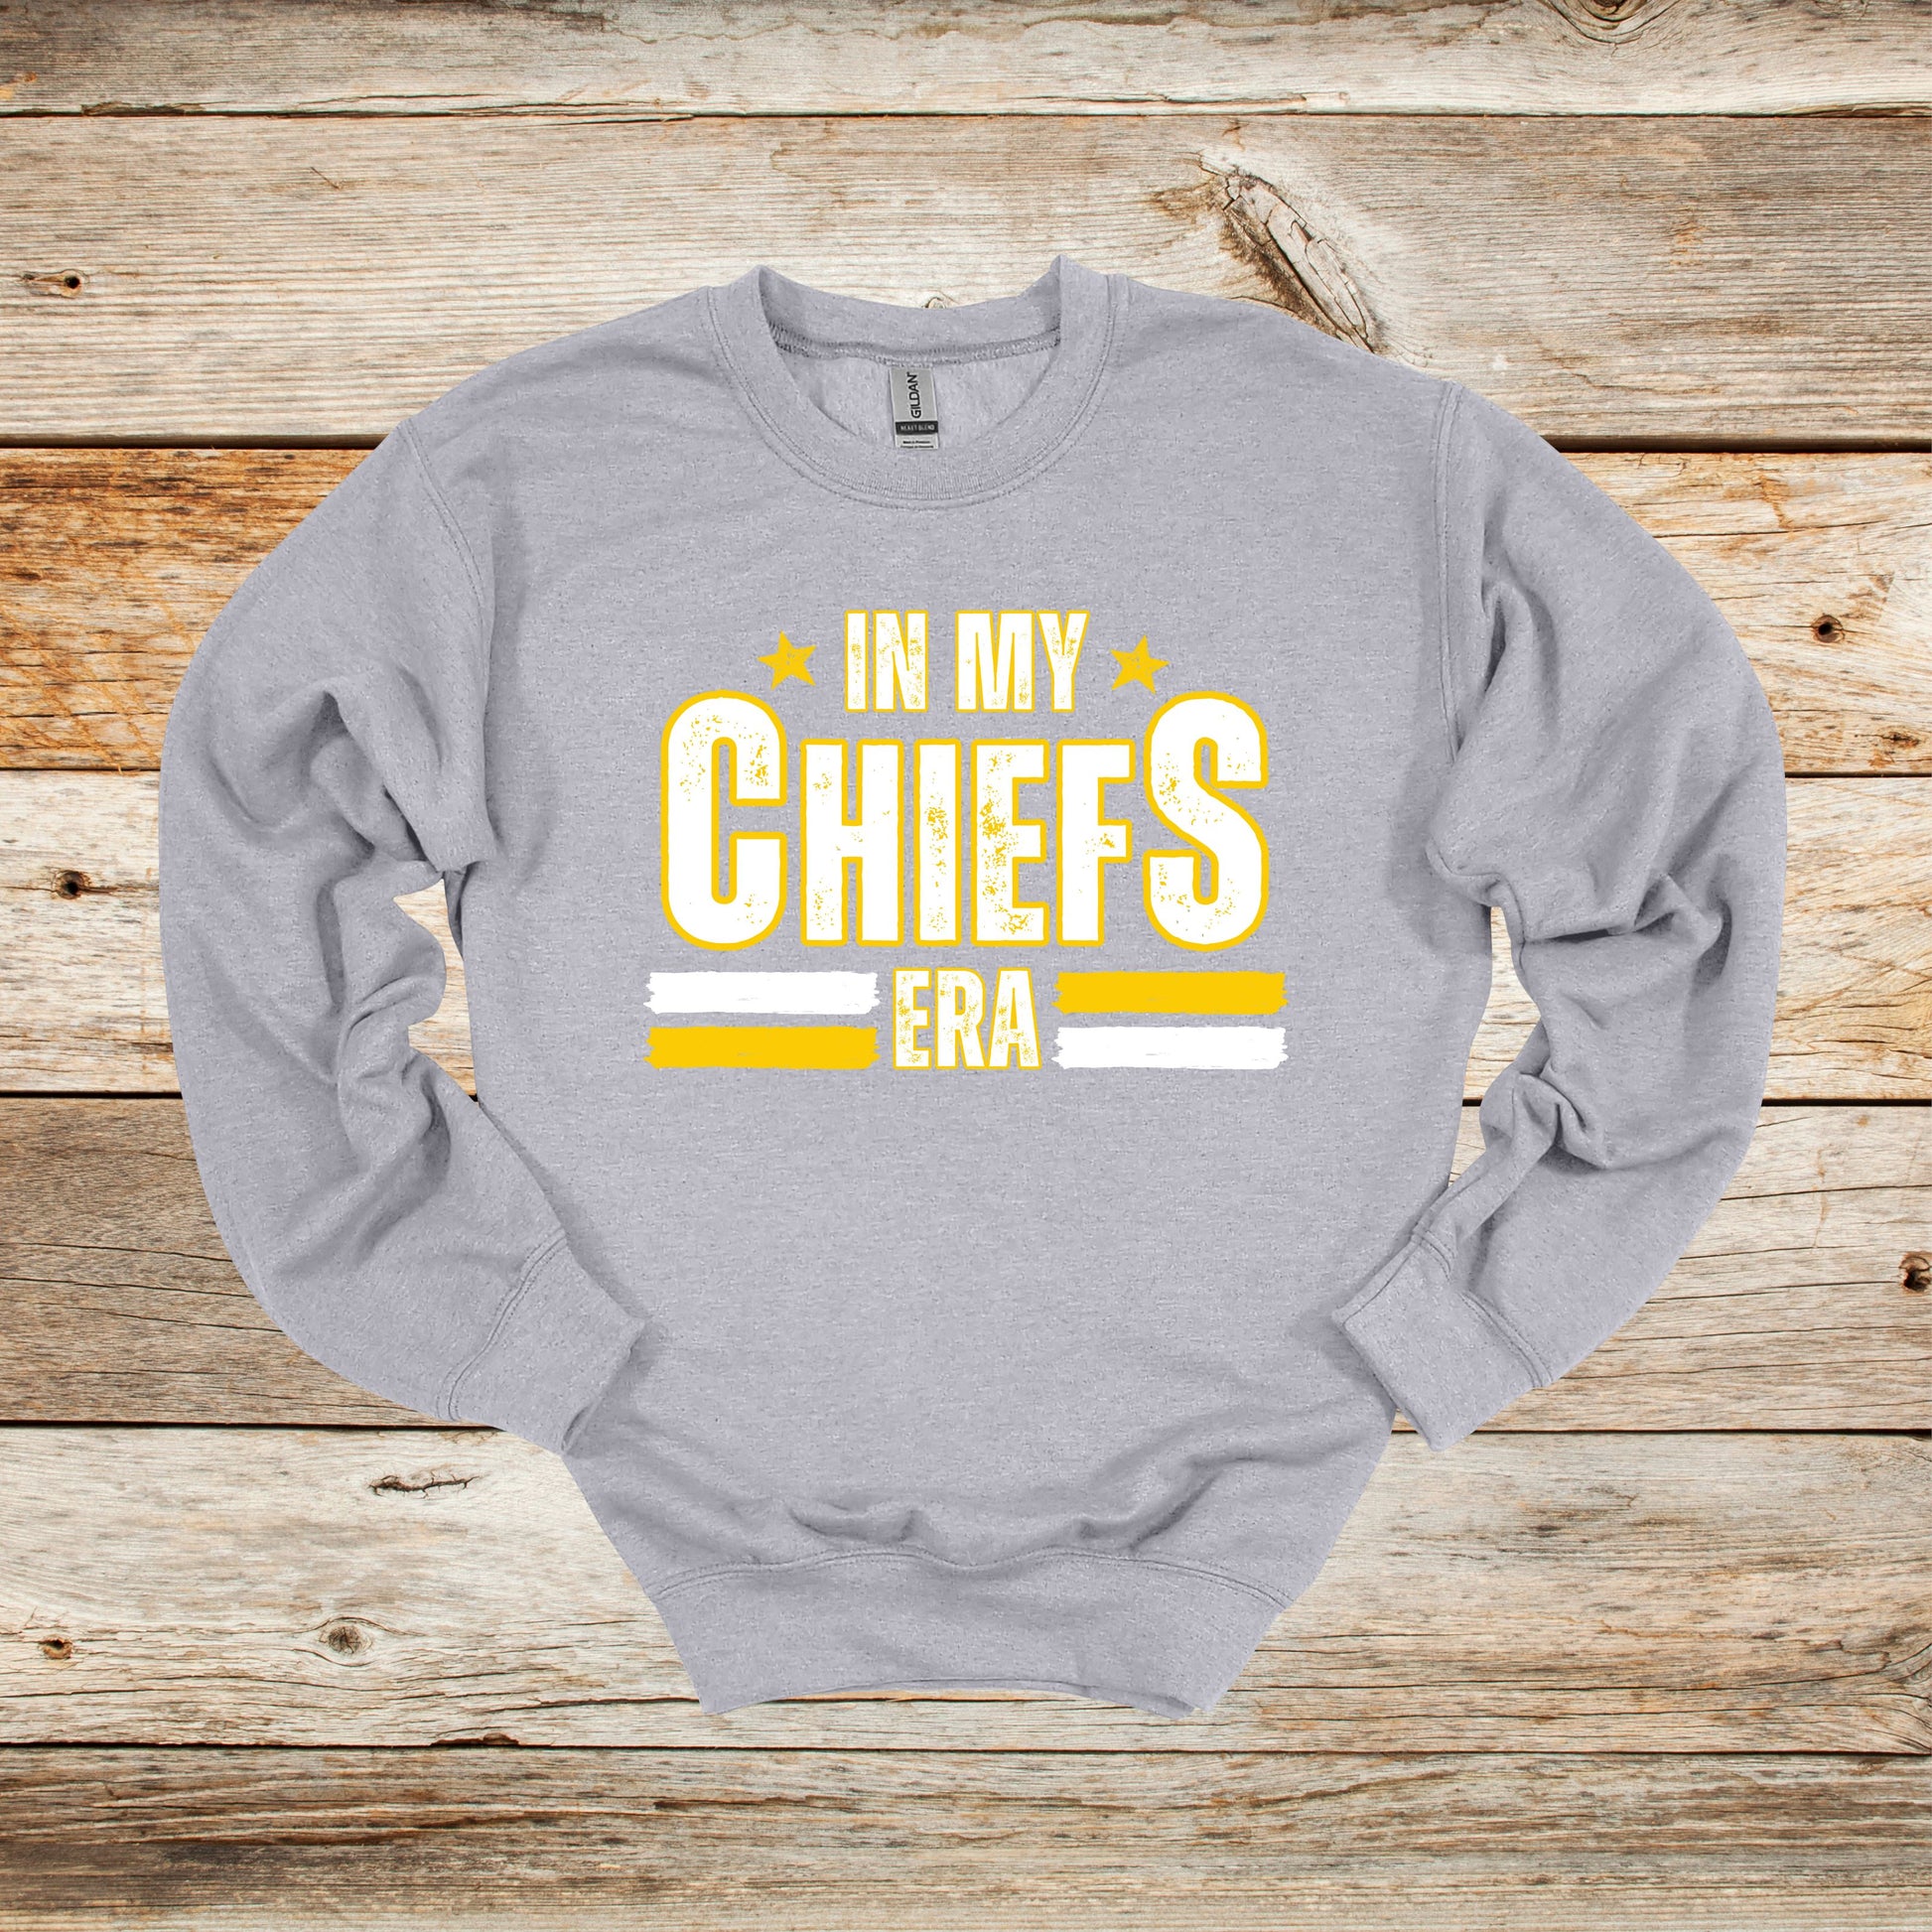 Football Crewneck and Hooded Sweatshirt - Chiefs Football - In My Chiefs Era - Adult and Children's Tee Shirts - Sports Hooded Sweatshirt Graphic Avenue Crewneck Sweatshirt Sport Grey Adult Small